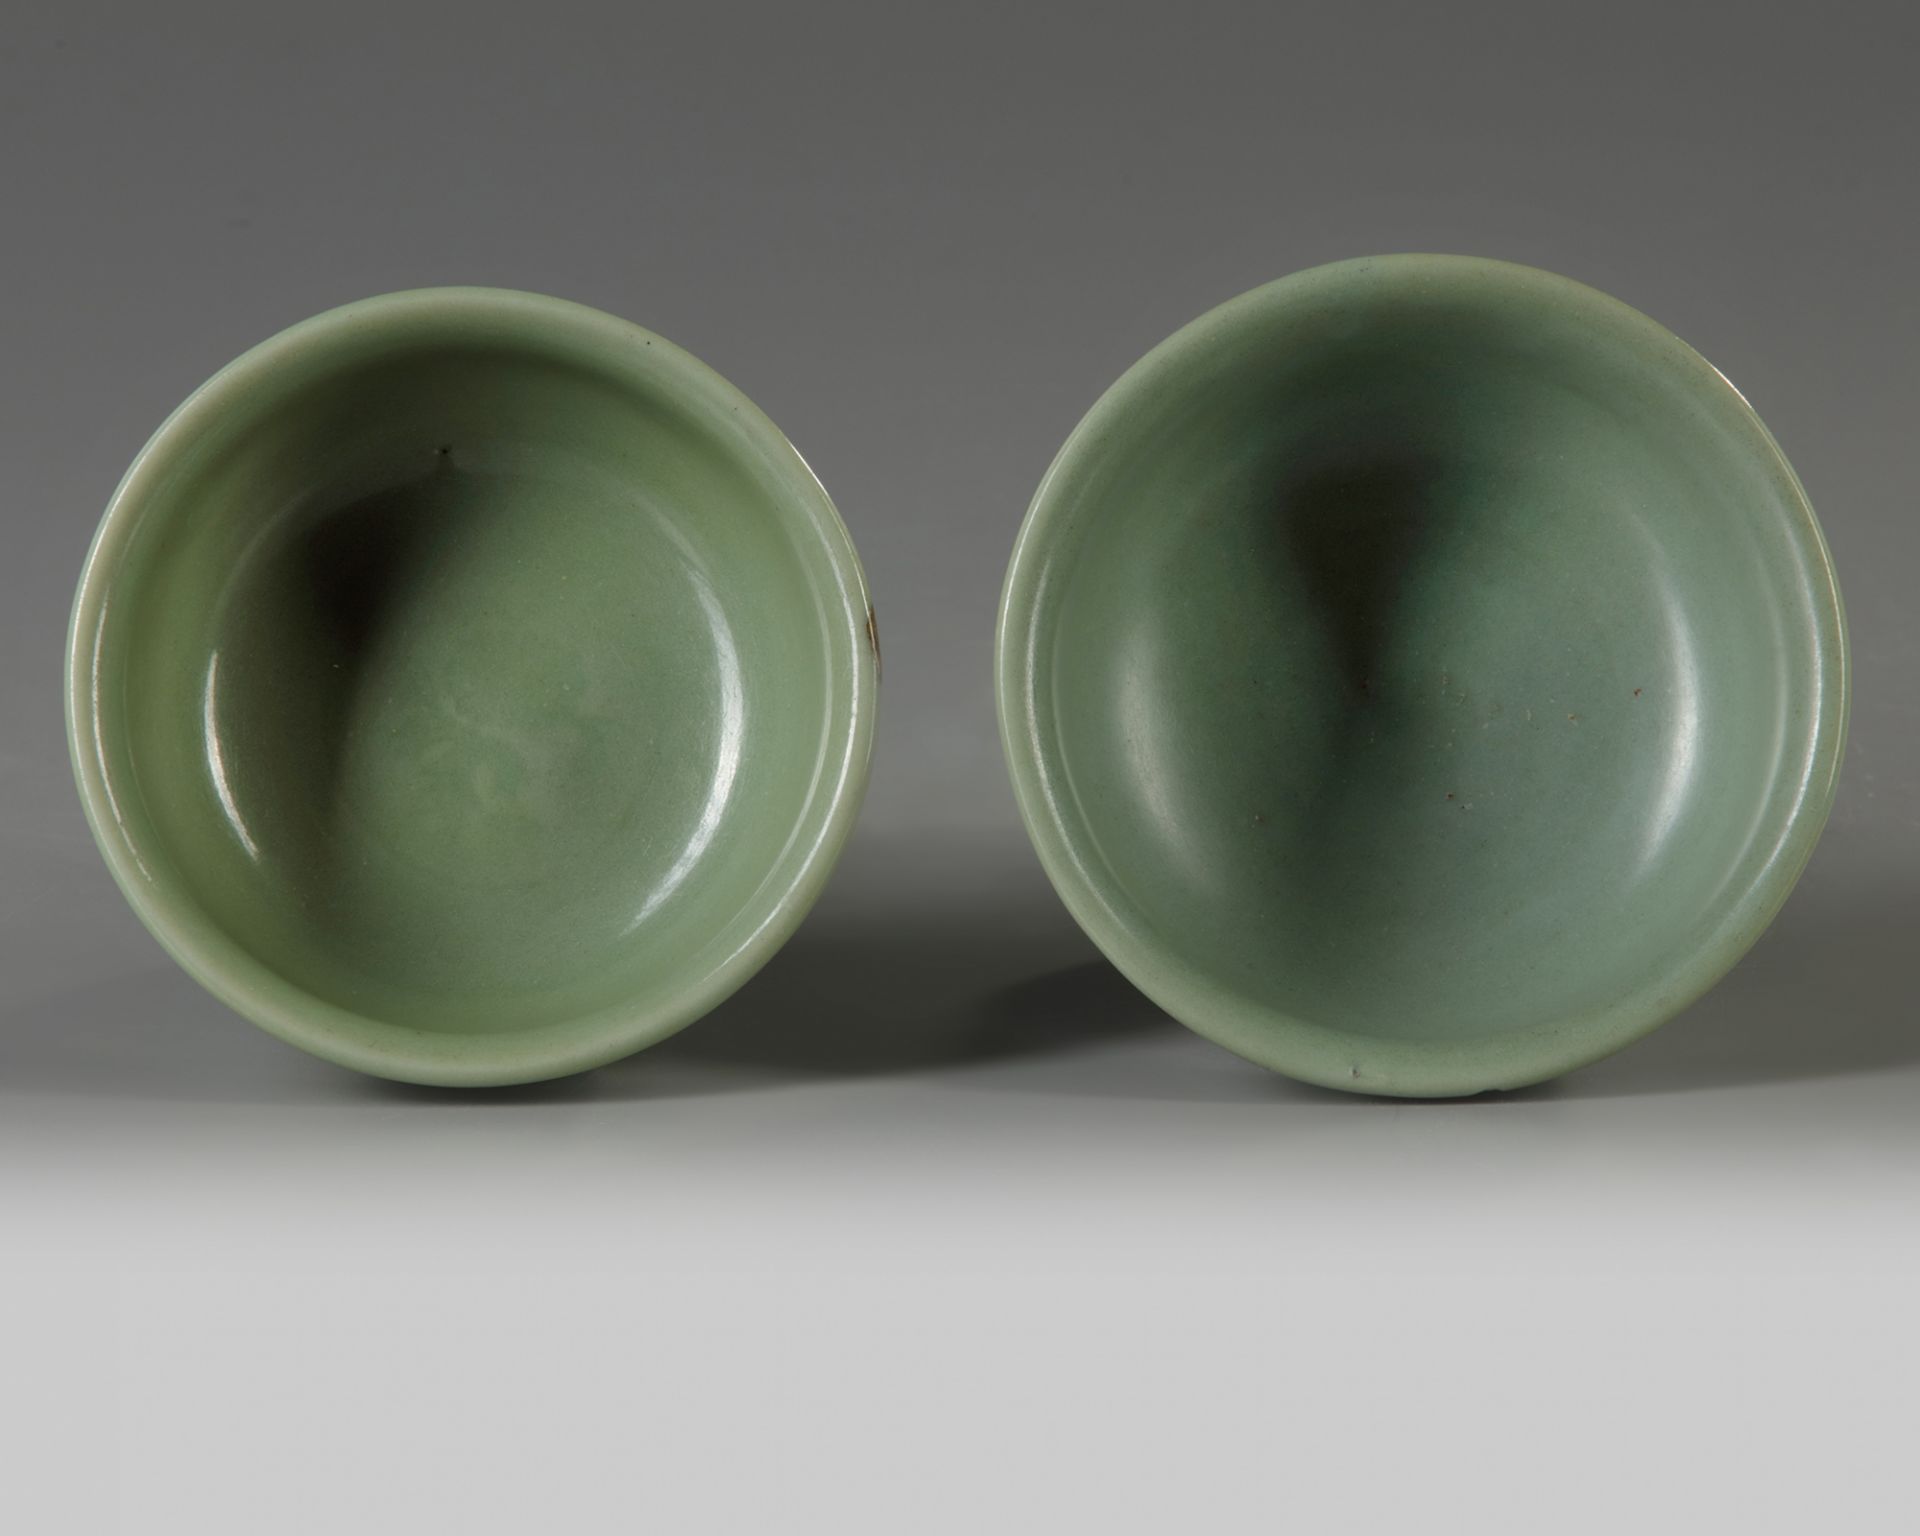 A SIMILAR PAIR OF CHINESE CELADON GLAZED STEMCUPS, LATE YUAN, EARLY MING DYNASTY, 14TH CENTURY - Image 5 of 5